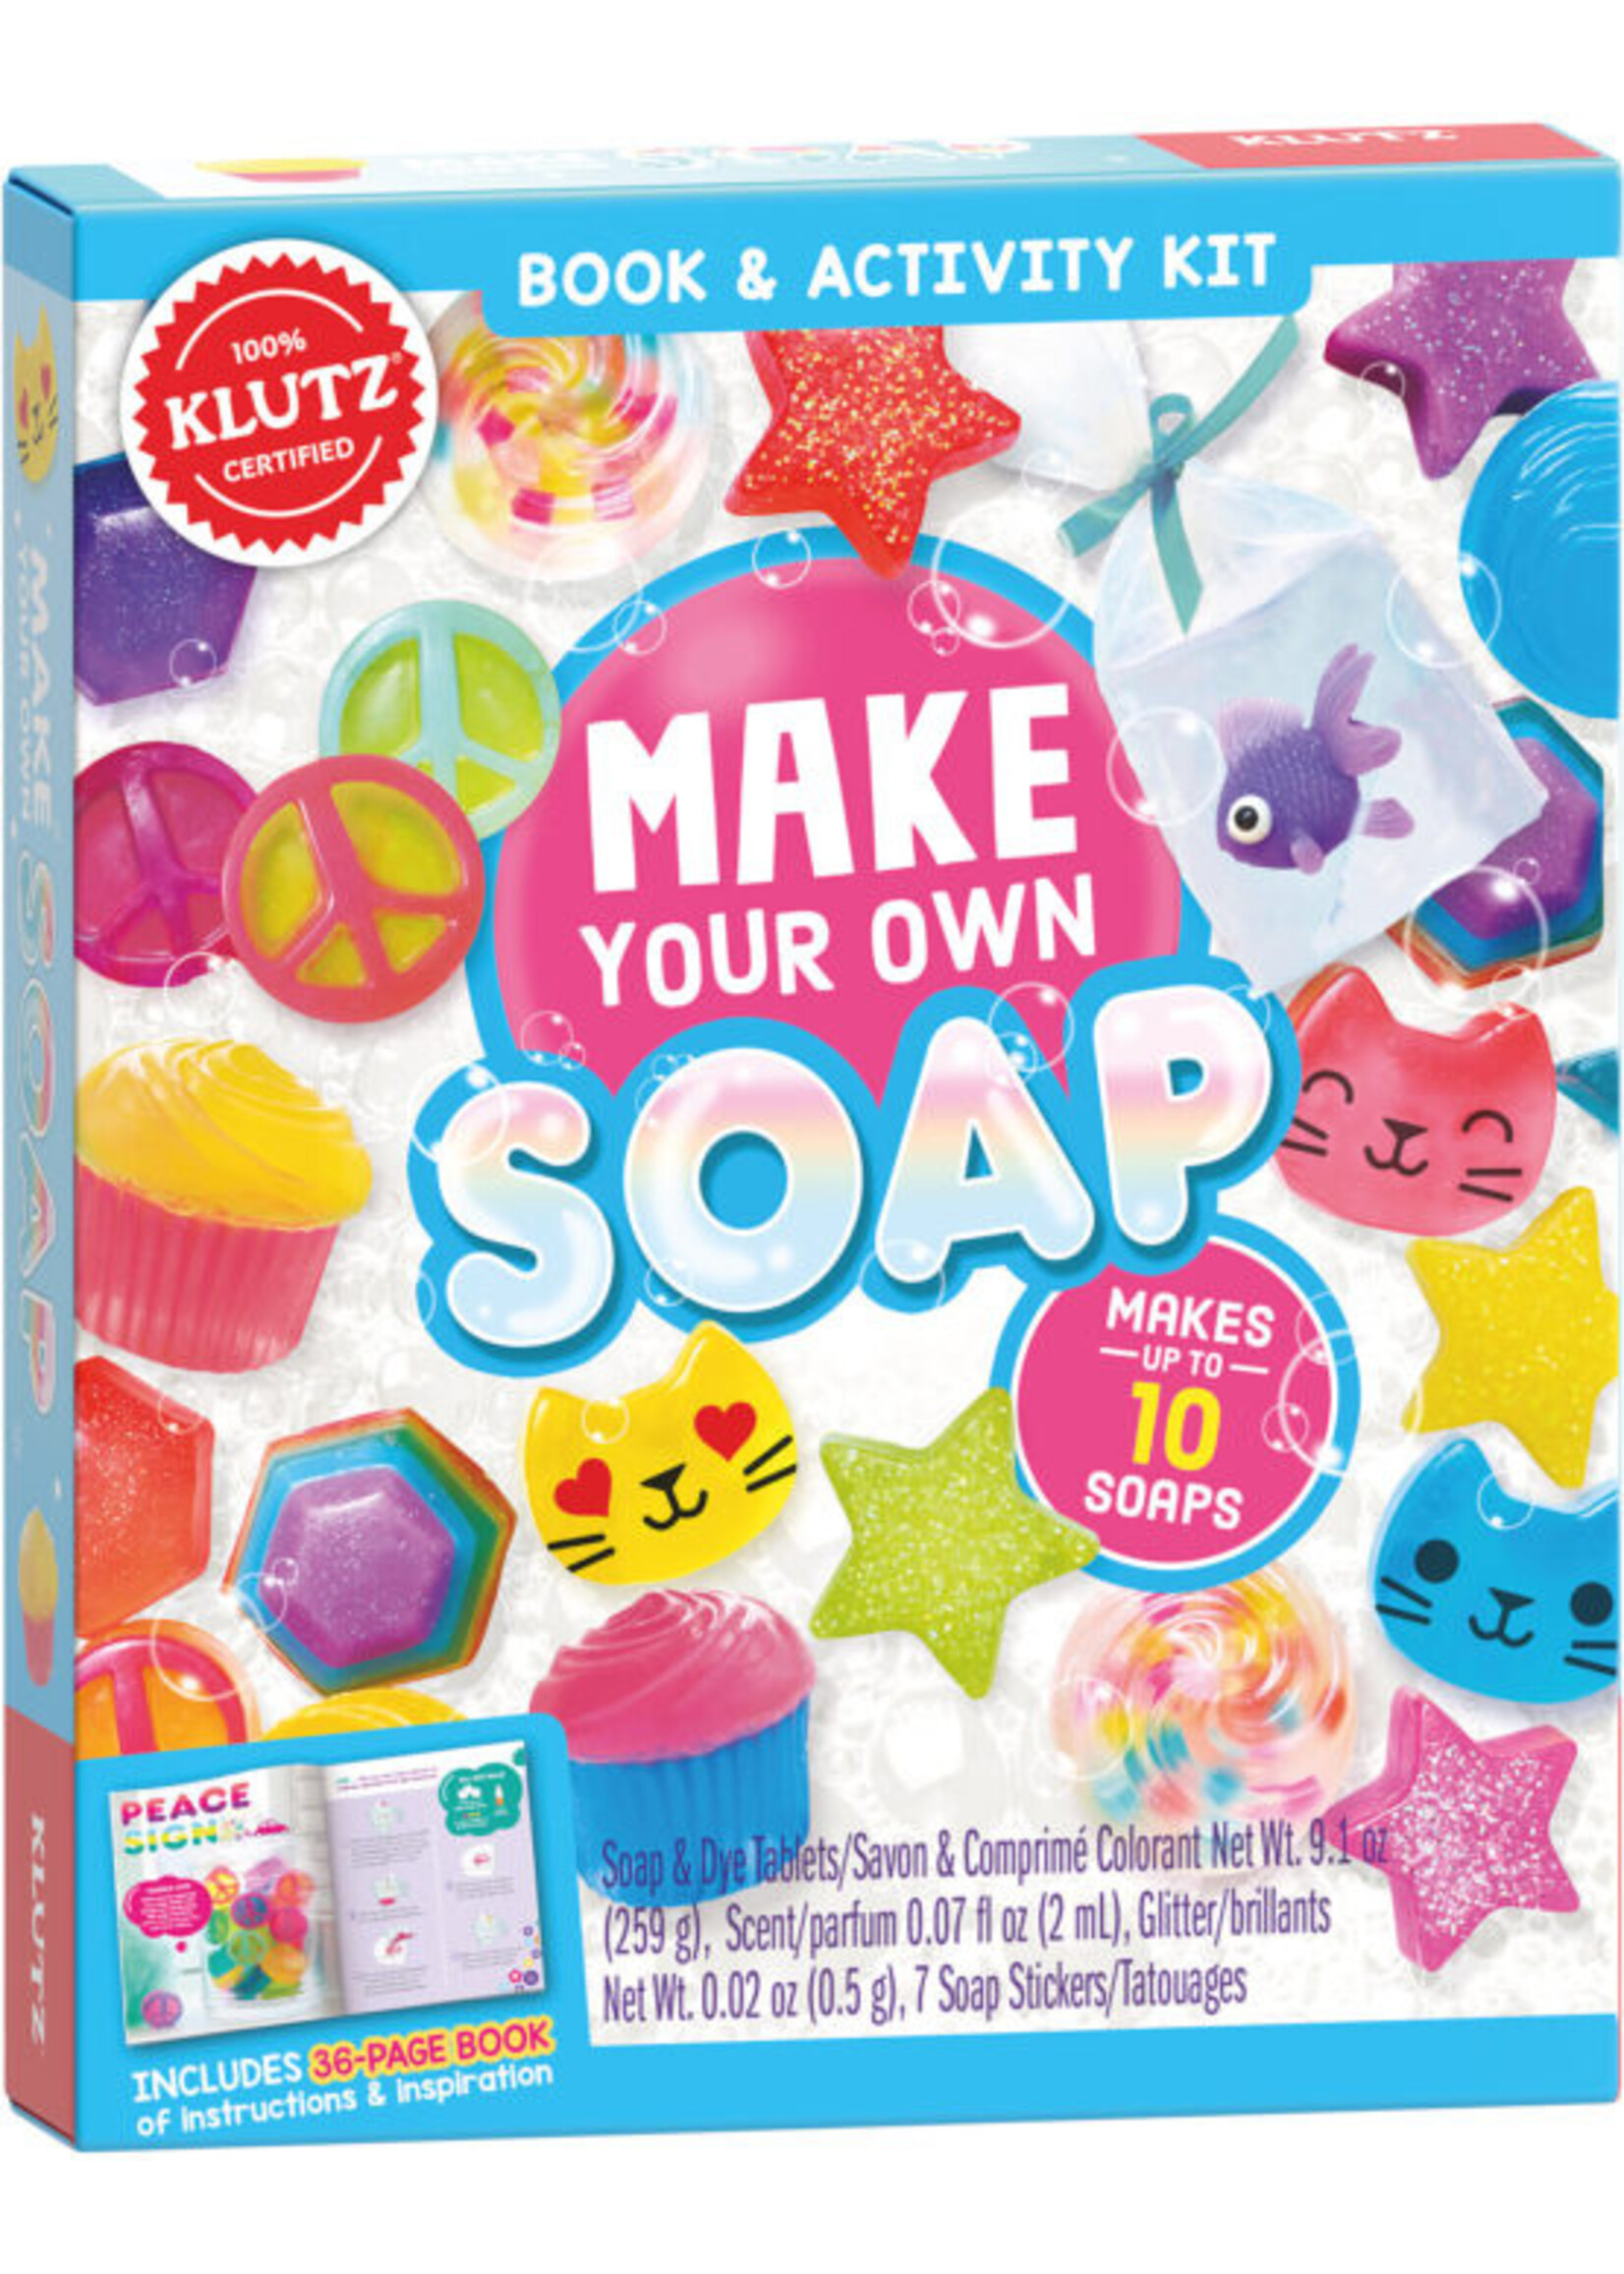 MAKE YOUR OWN SOAP (KLUTZ)